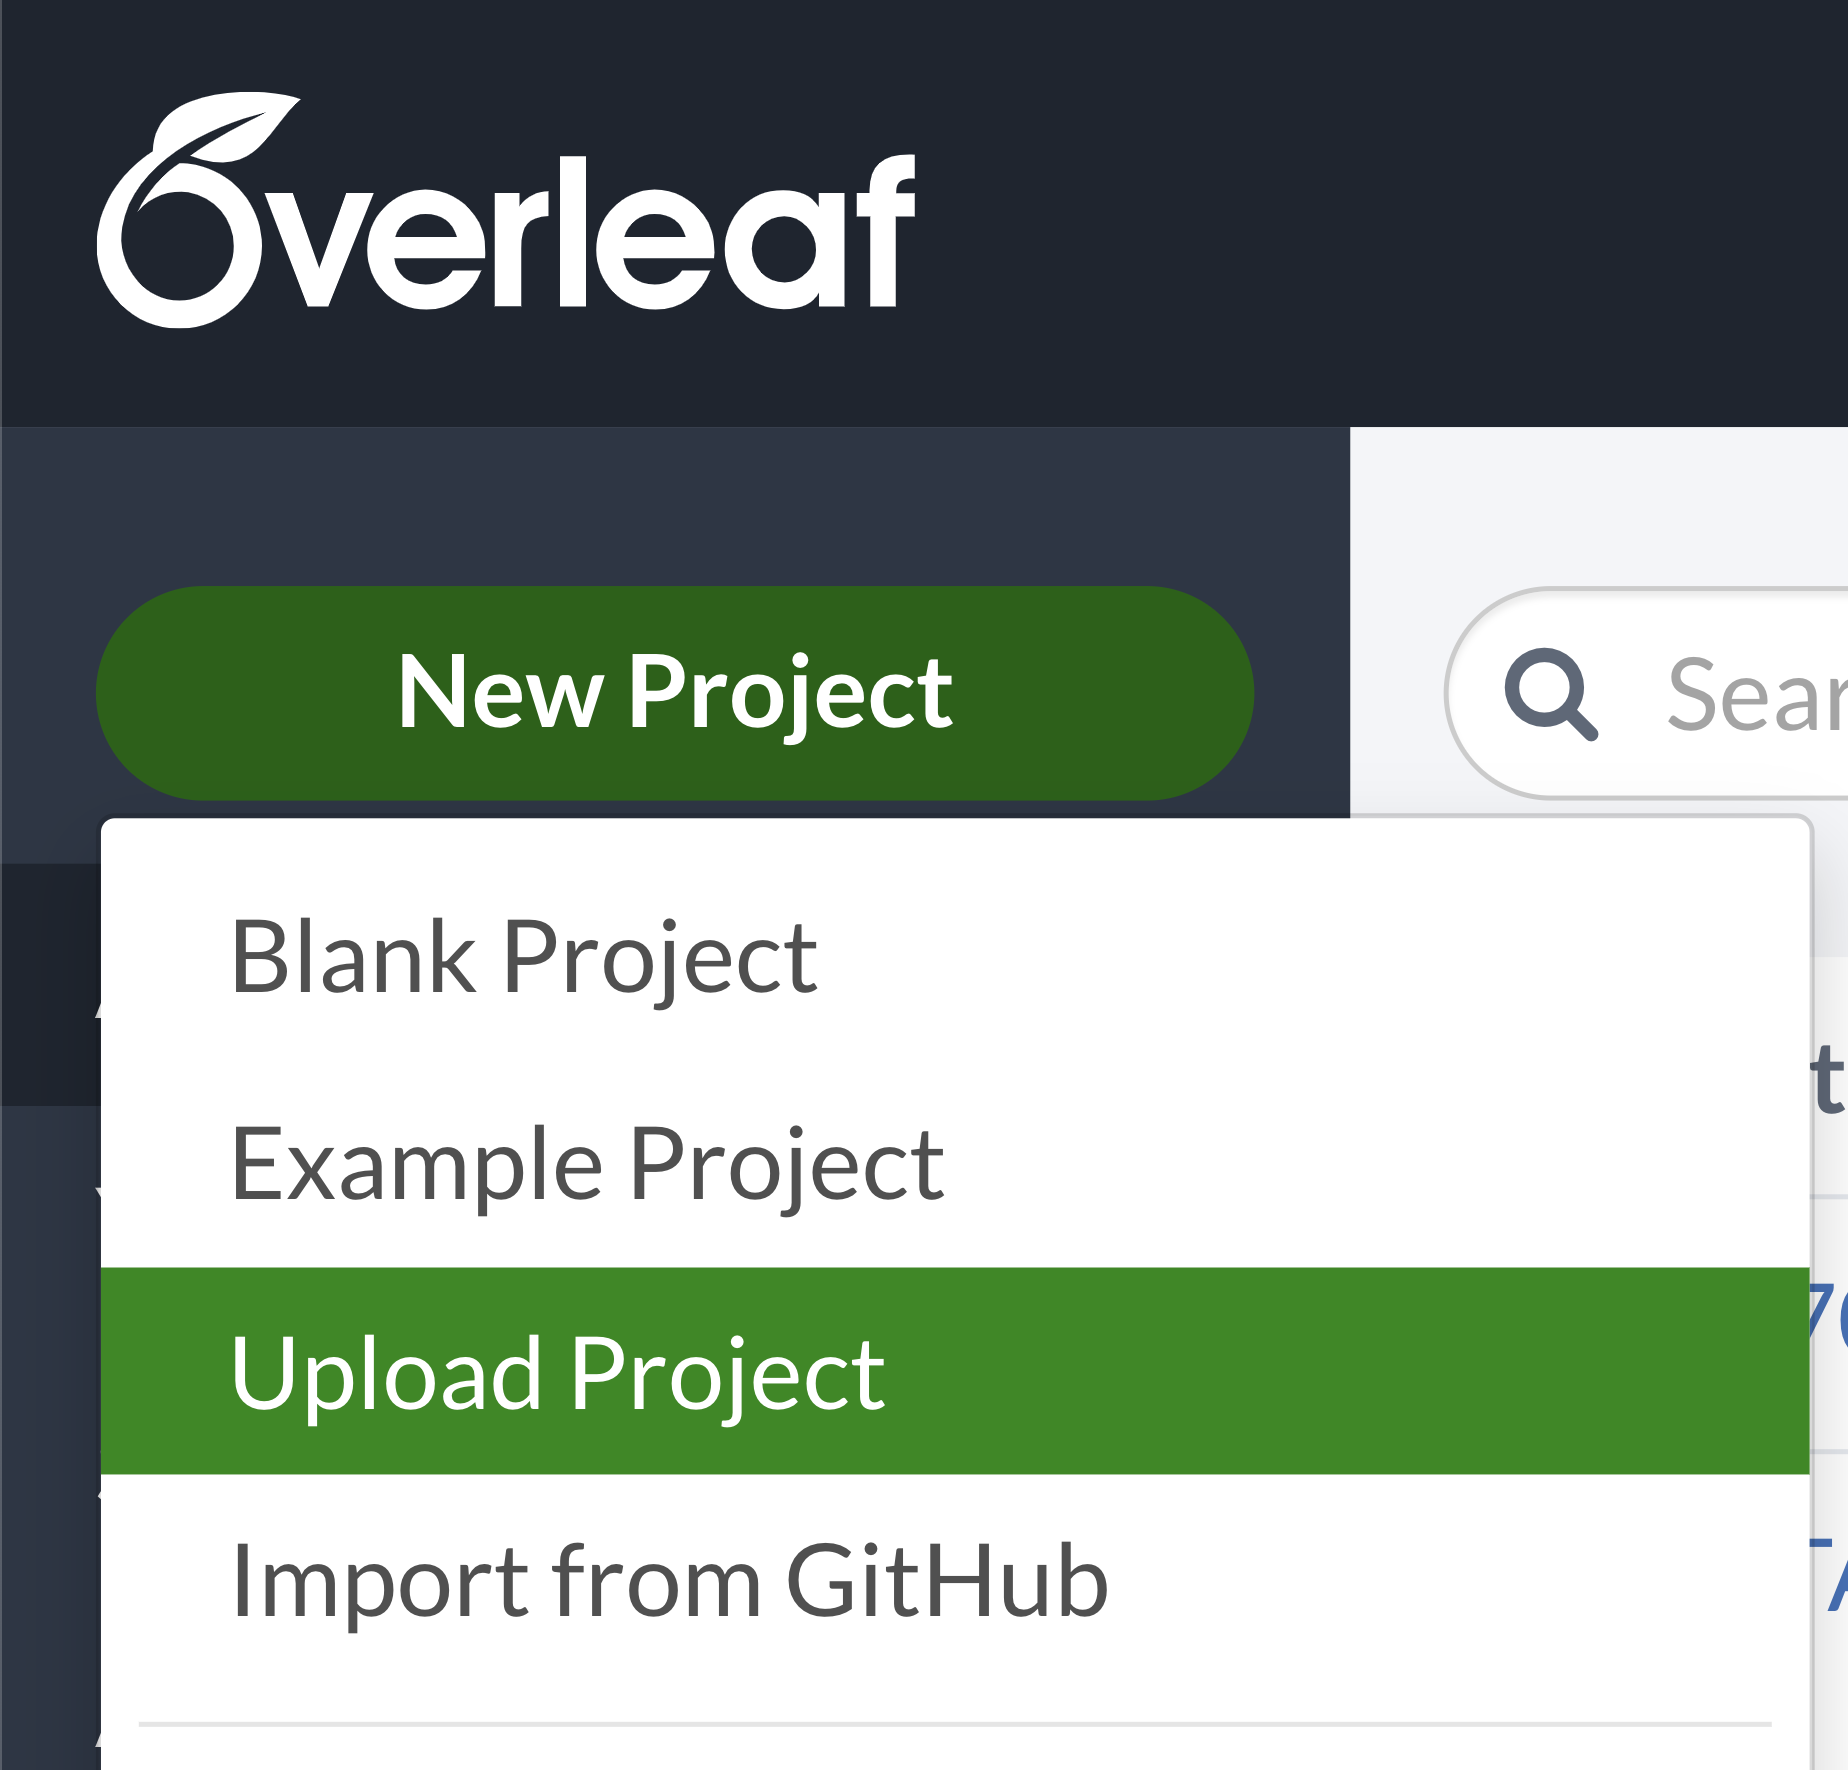 A screenshot of part of the Overleaf home website, where Upload project (under New Project) is highlighted.